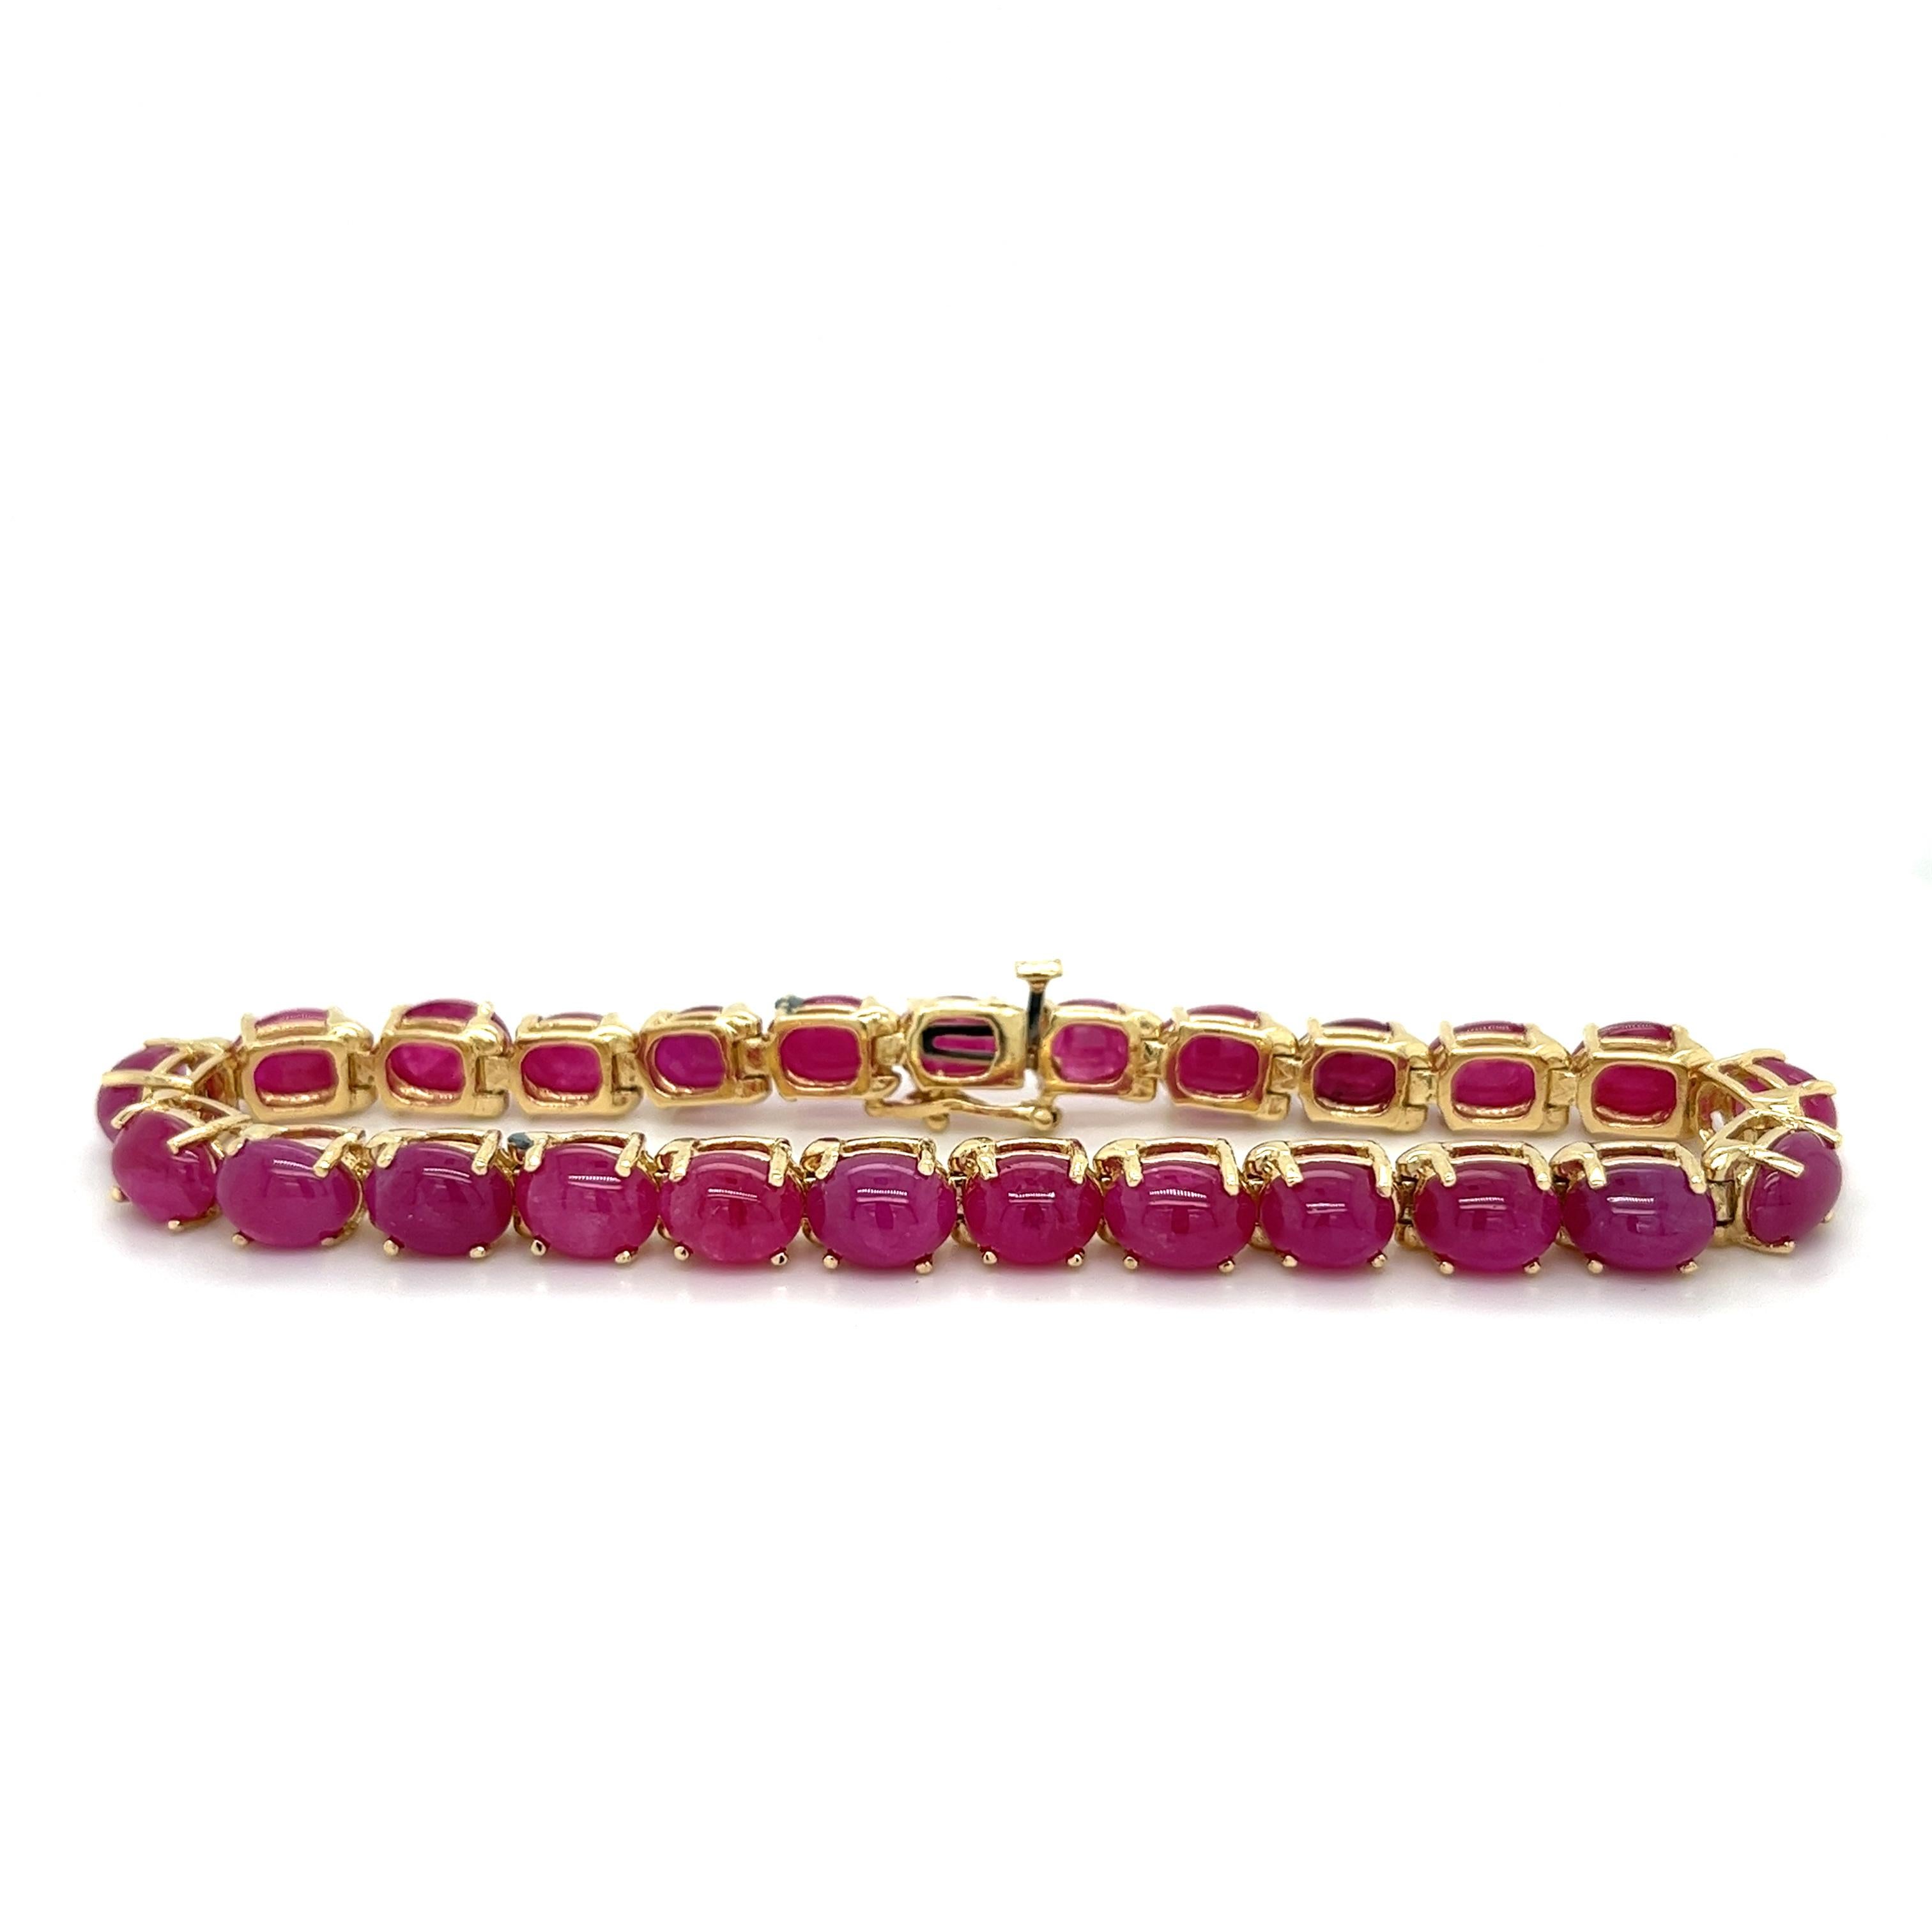 GIA certified natural Ruby bracelet in 14-karat solid yellow gold. The ideal length and width for both men and women. Featuring a box closure with single latch safety. 24 total Rubies, weighing a combined approximate weight of 40 carats. Oval